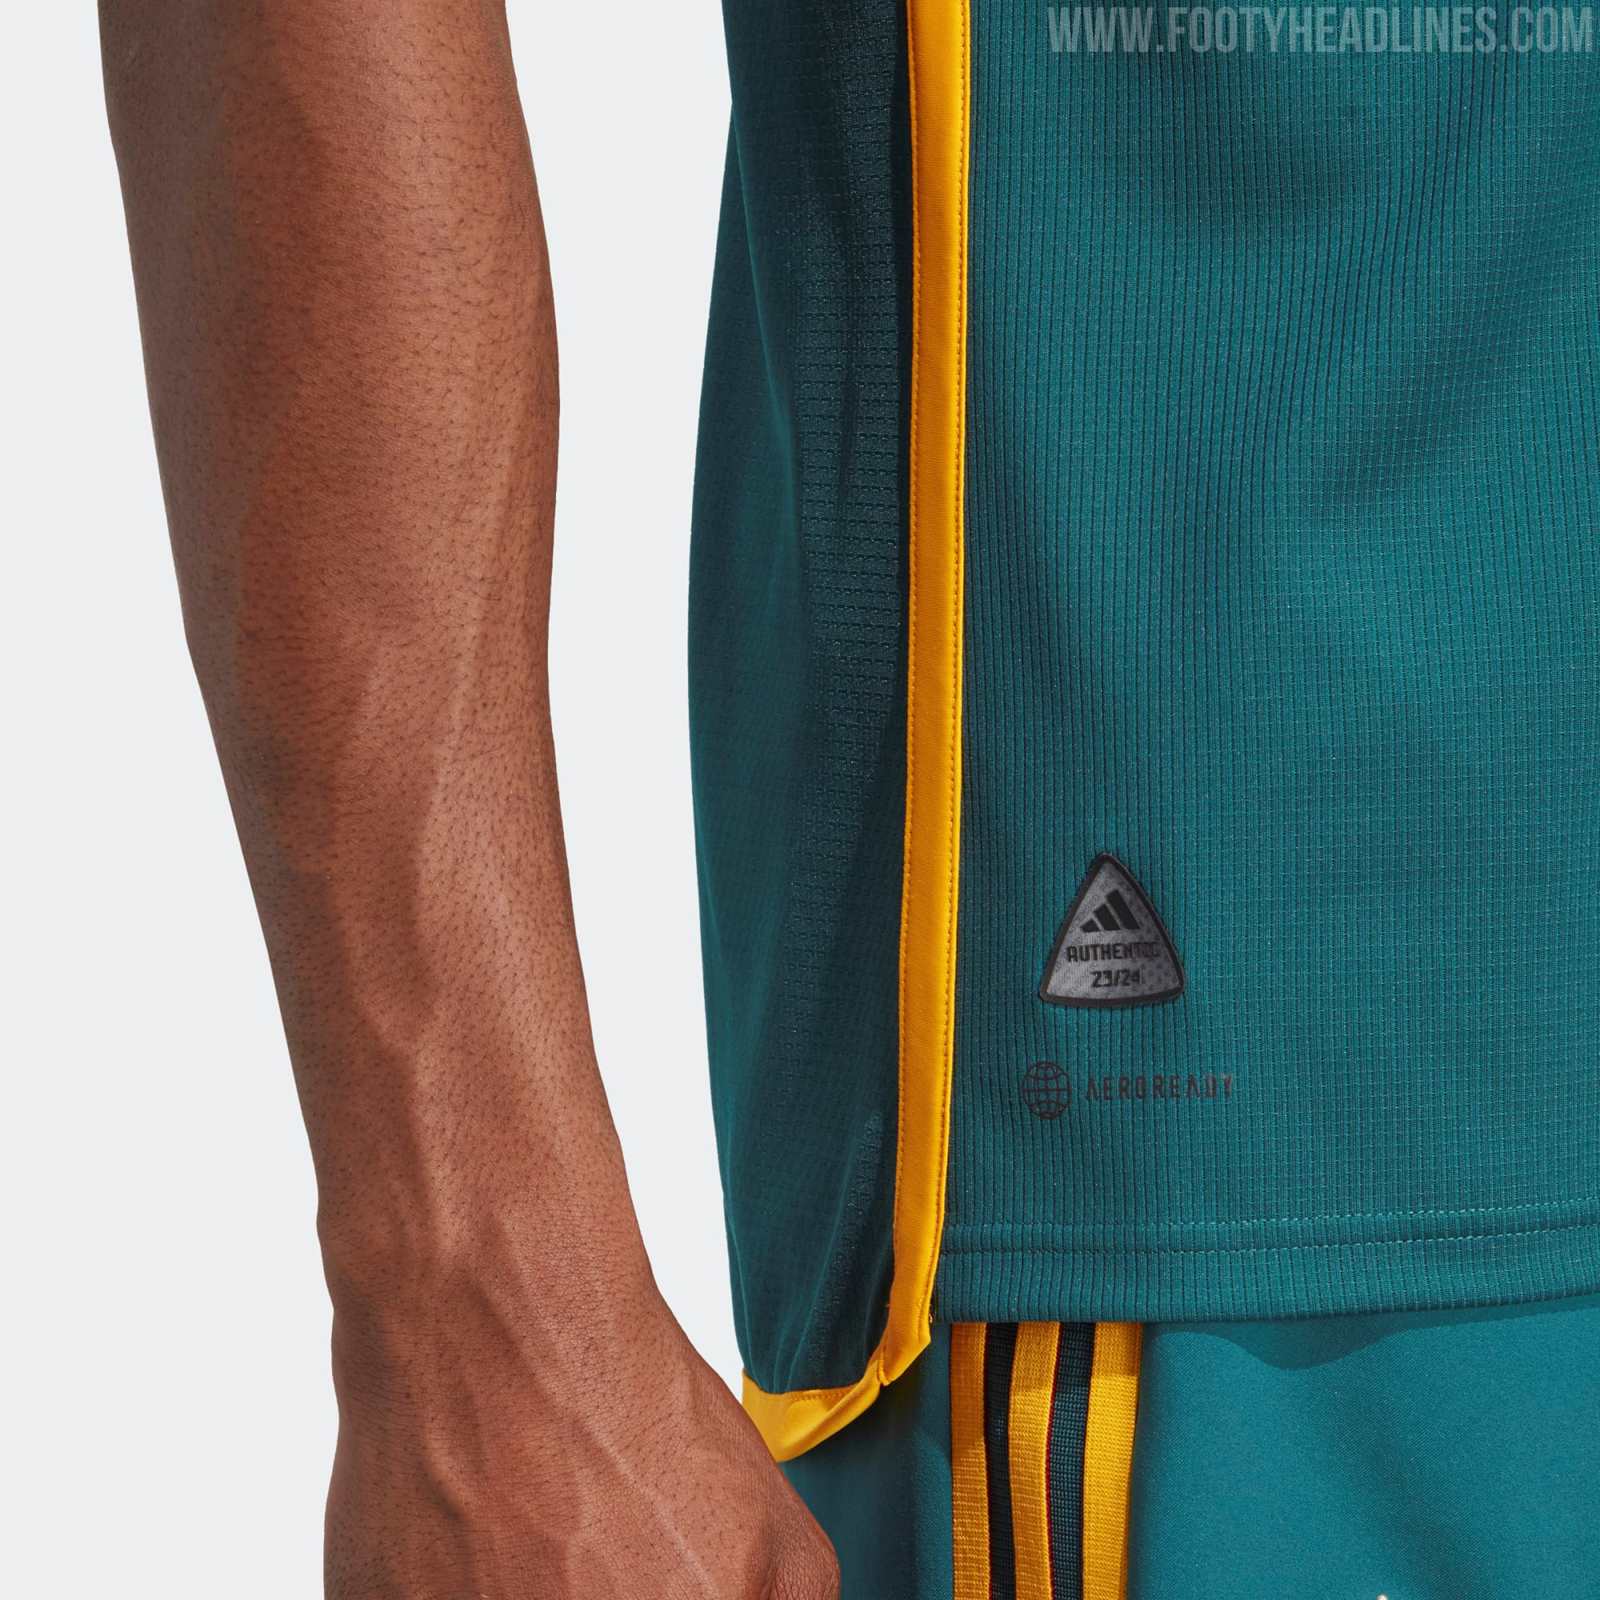 Los Angeles Galaxy Away Jersey + Short Kids 2021/22, Official